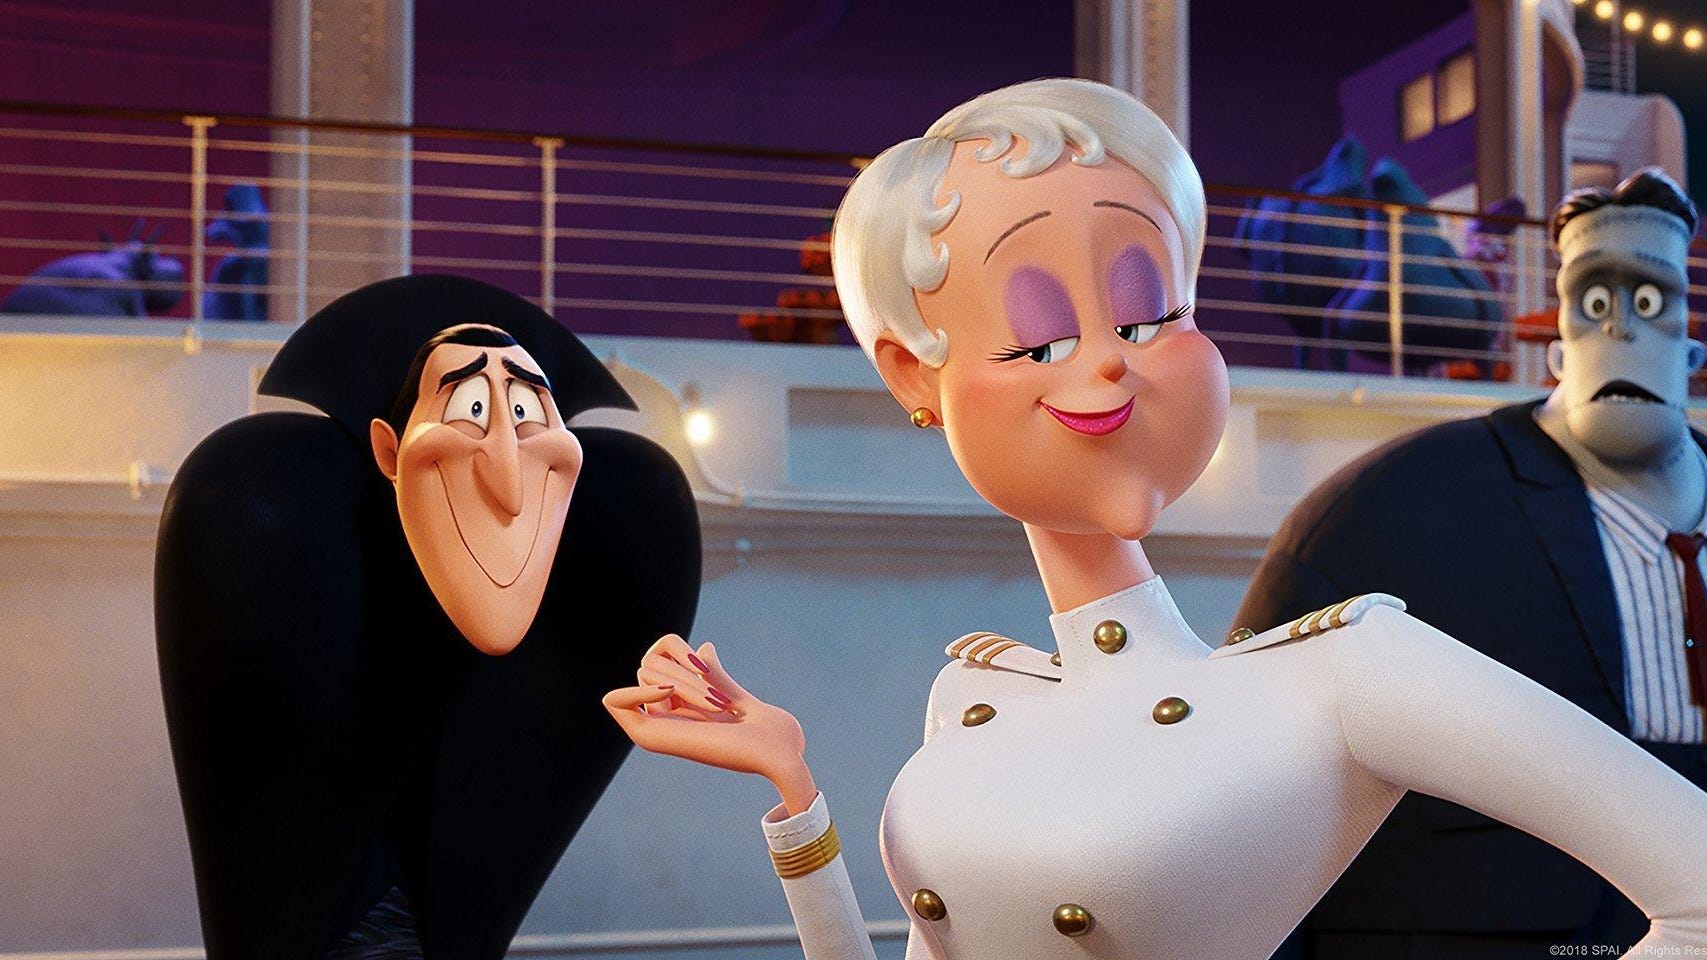 Review: ‘Hotel Transylvania 3’ comes up short on zing